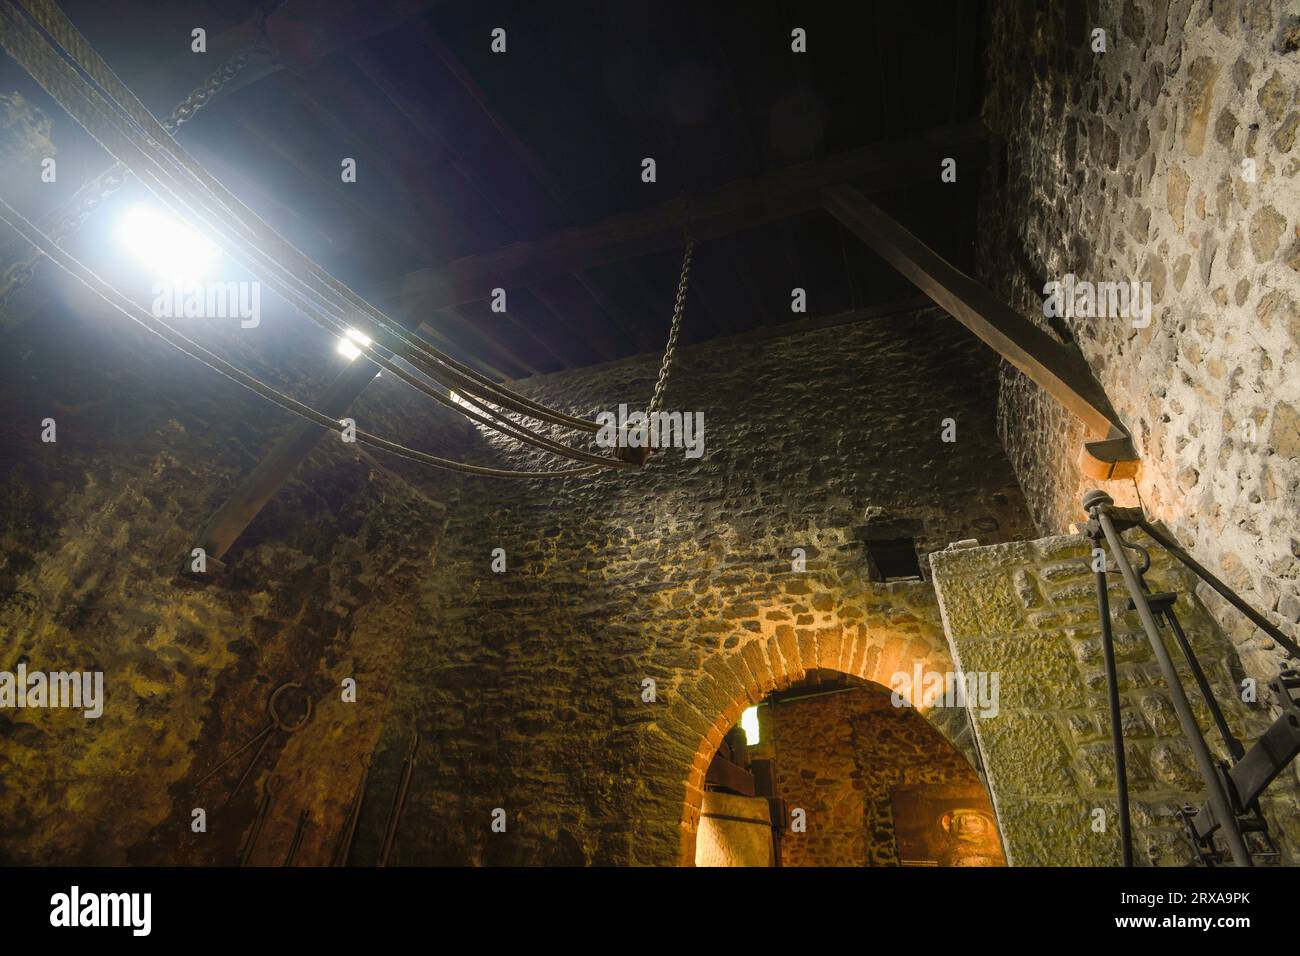 interior environment of the El Pobal ironworks Stock Photo